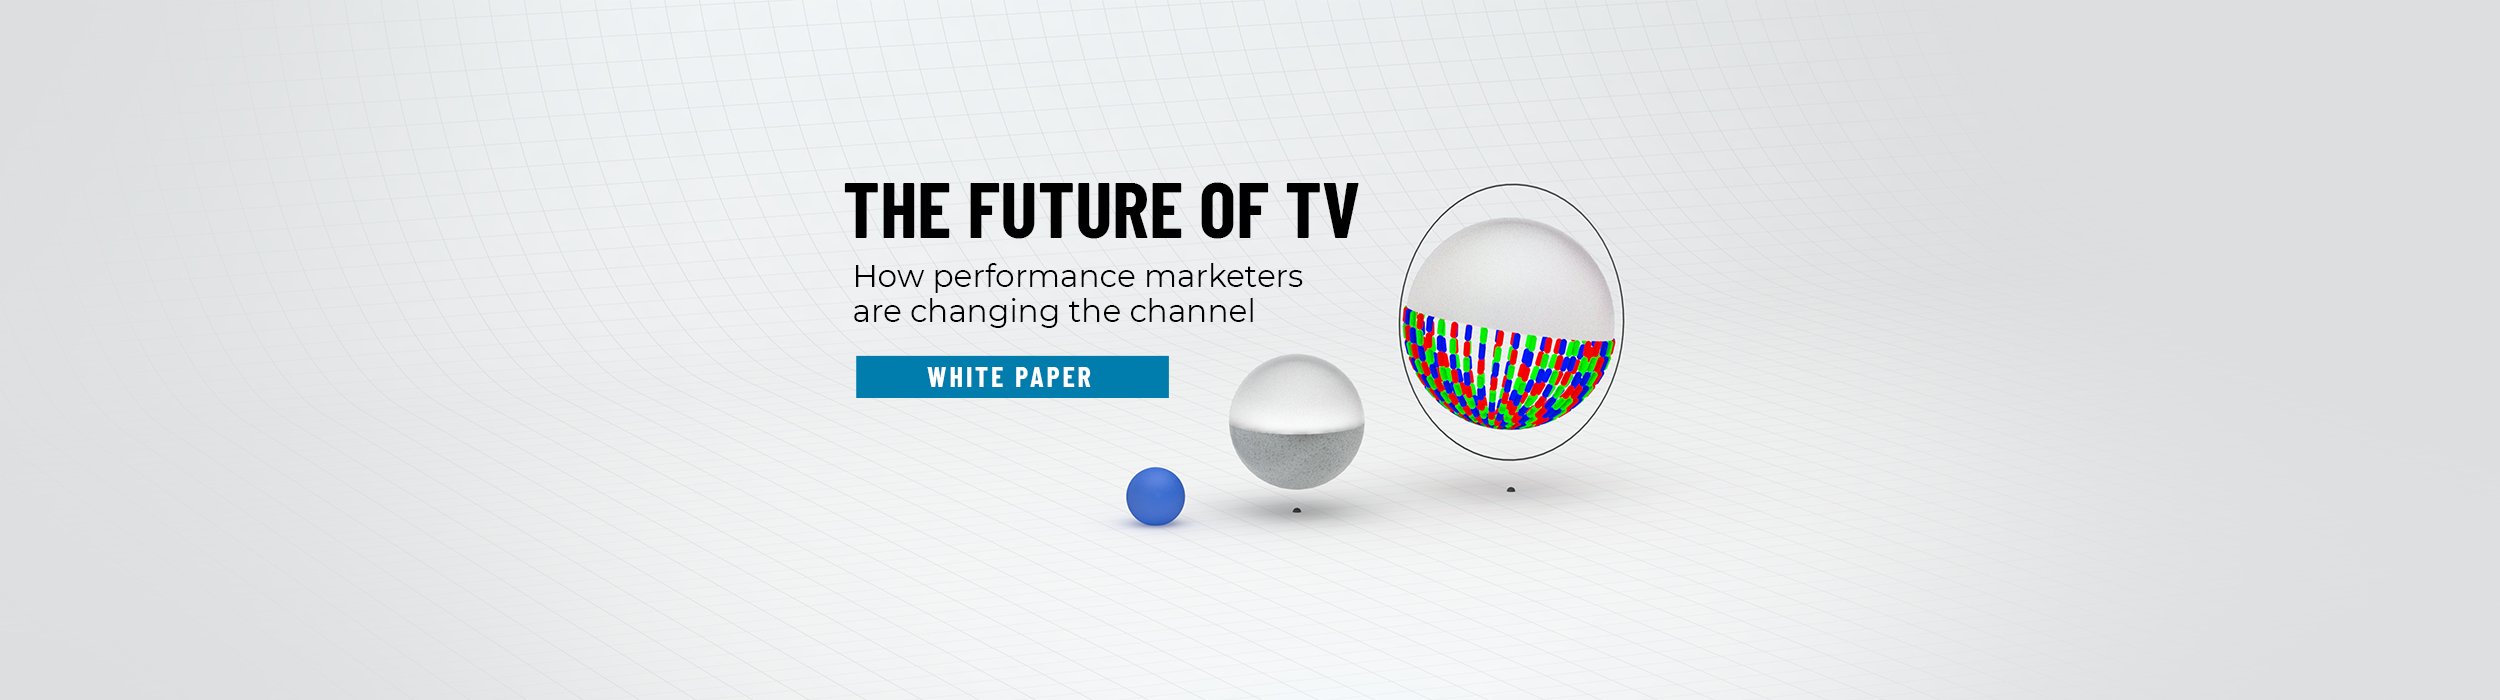 The Future of TV Advertising: How Performance Marketers Are Changing the Channel